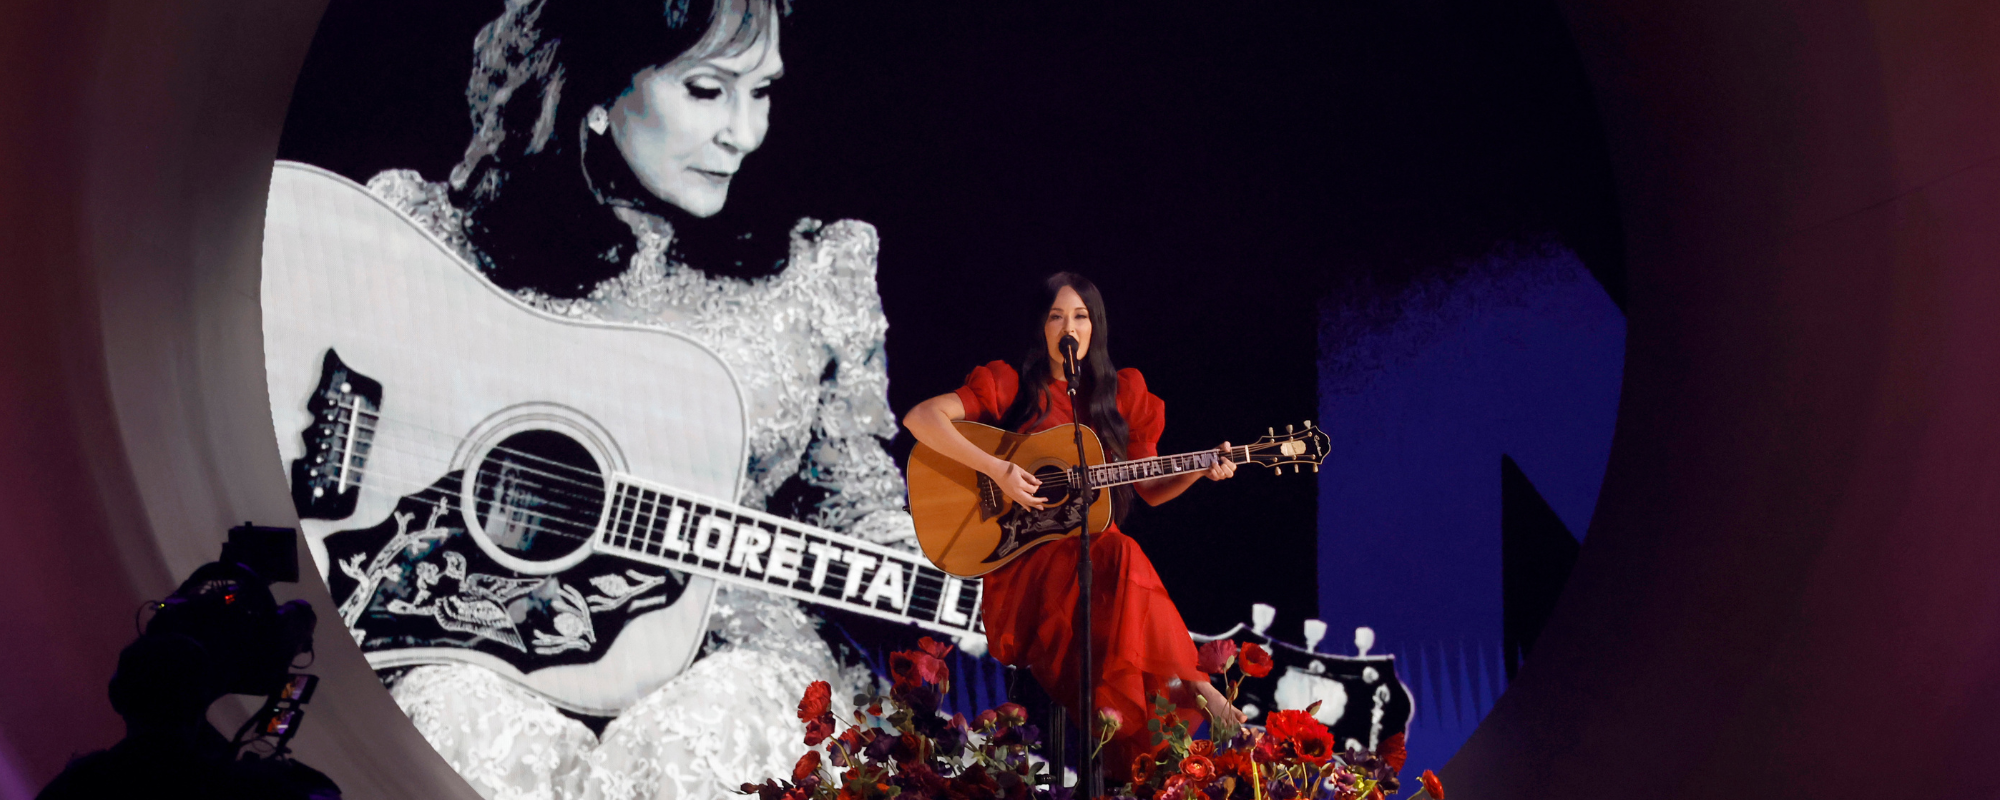 Remember When: Kacey Musgraves Honors Loretta Lynn with Performance of “Coal Miner’s Daughter”